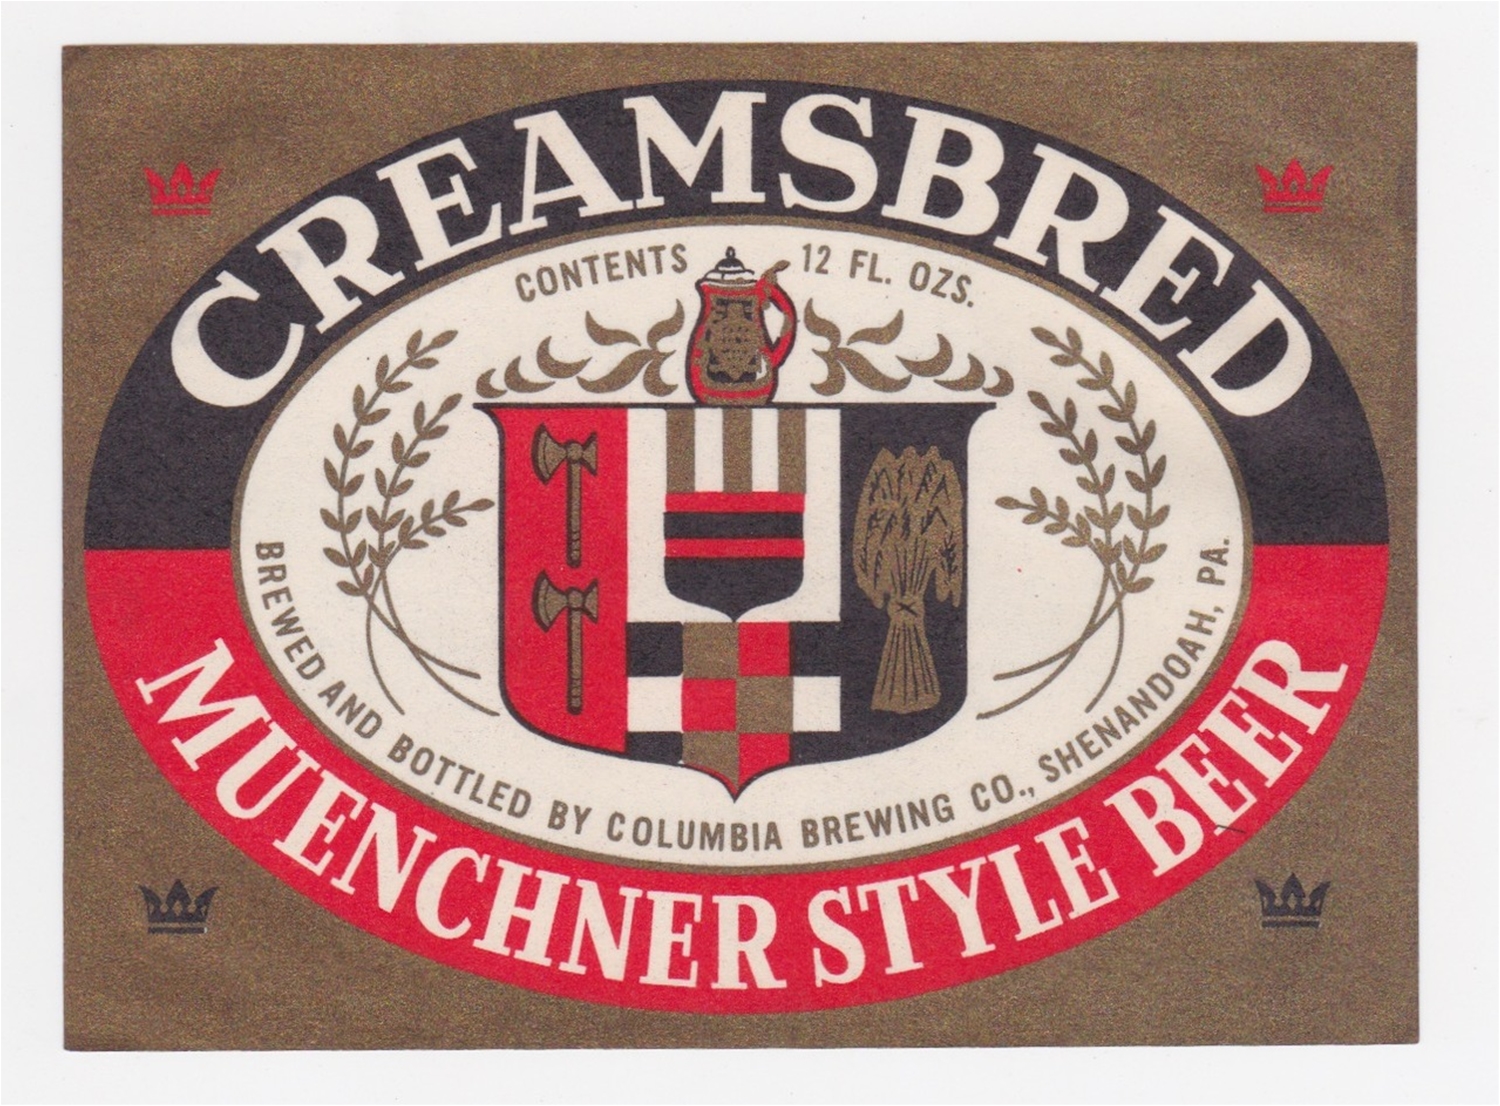 Creamsbred Muenchner Style Beer Label